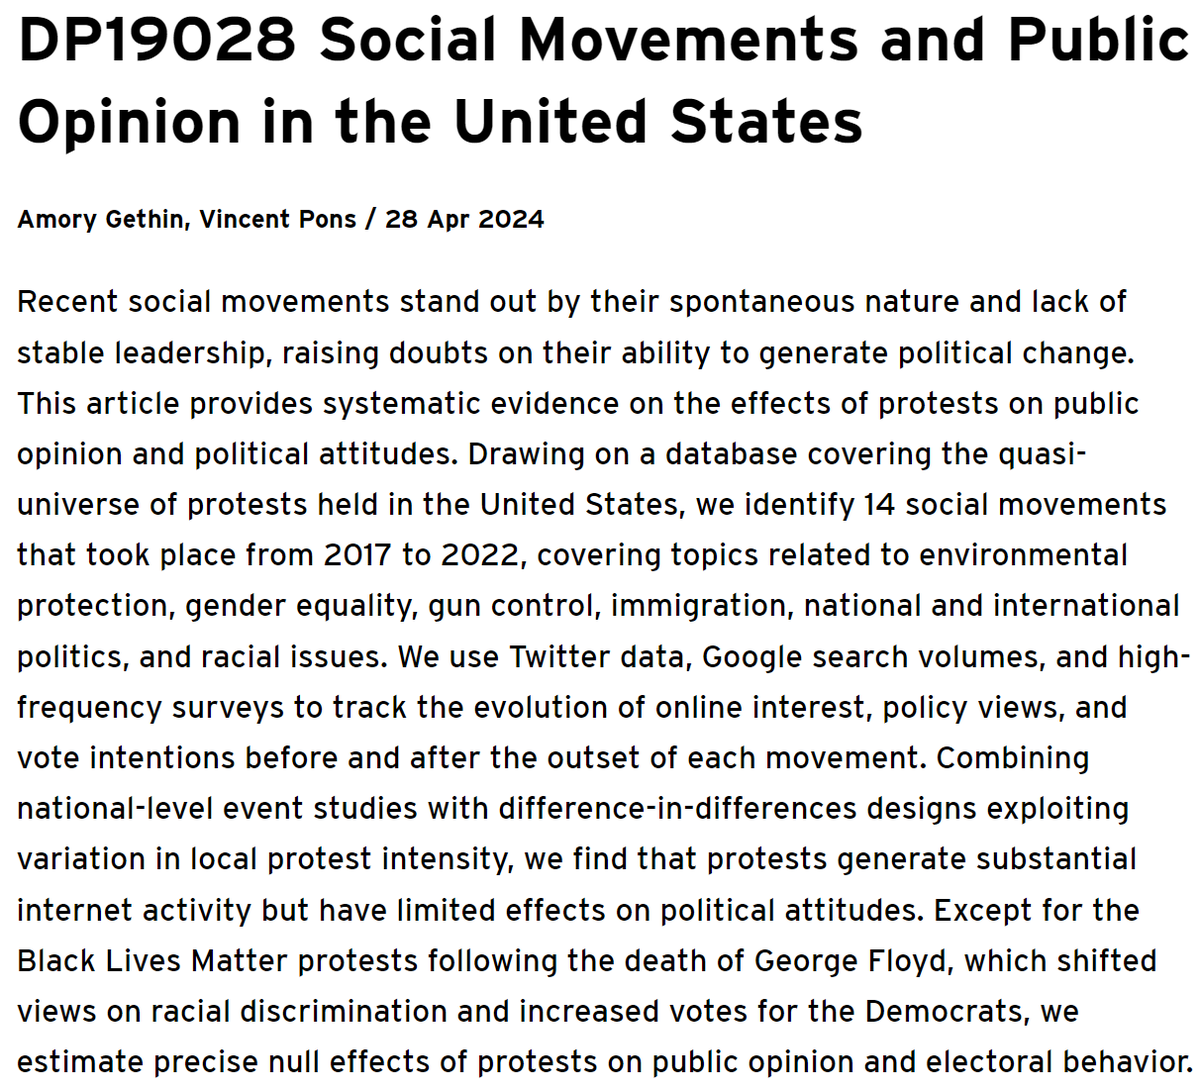 In a new paper with @VinPons, we provide new systematic evidence on this question in the context of the United States 2017-2022, combining data on the quasi-universe of protests in the U.S. with social media data and high-frequency surveys.